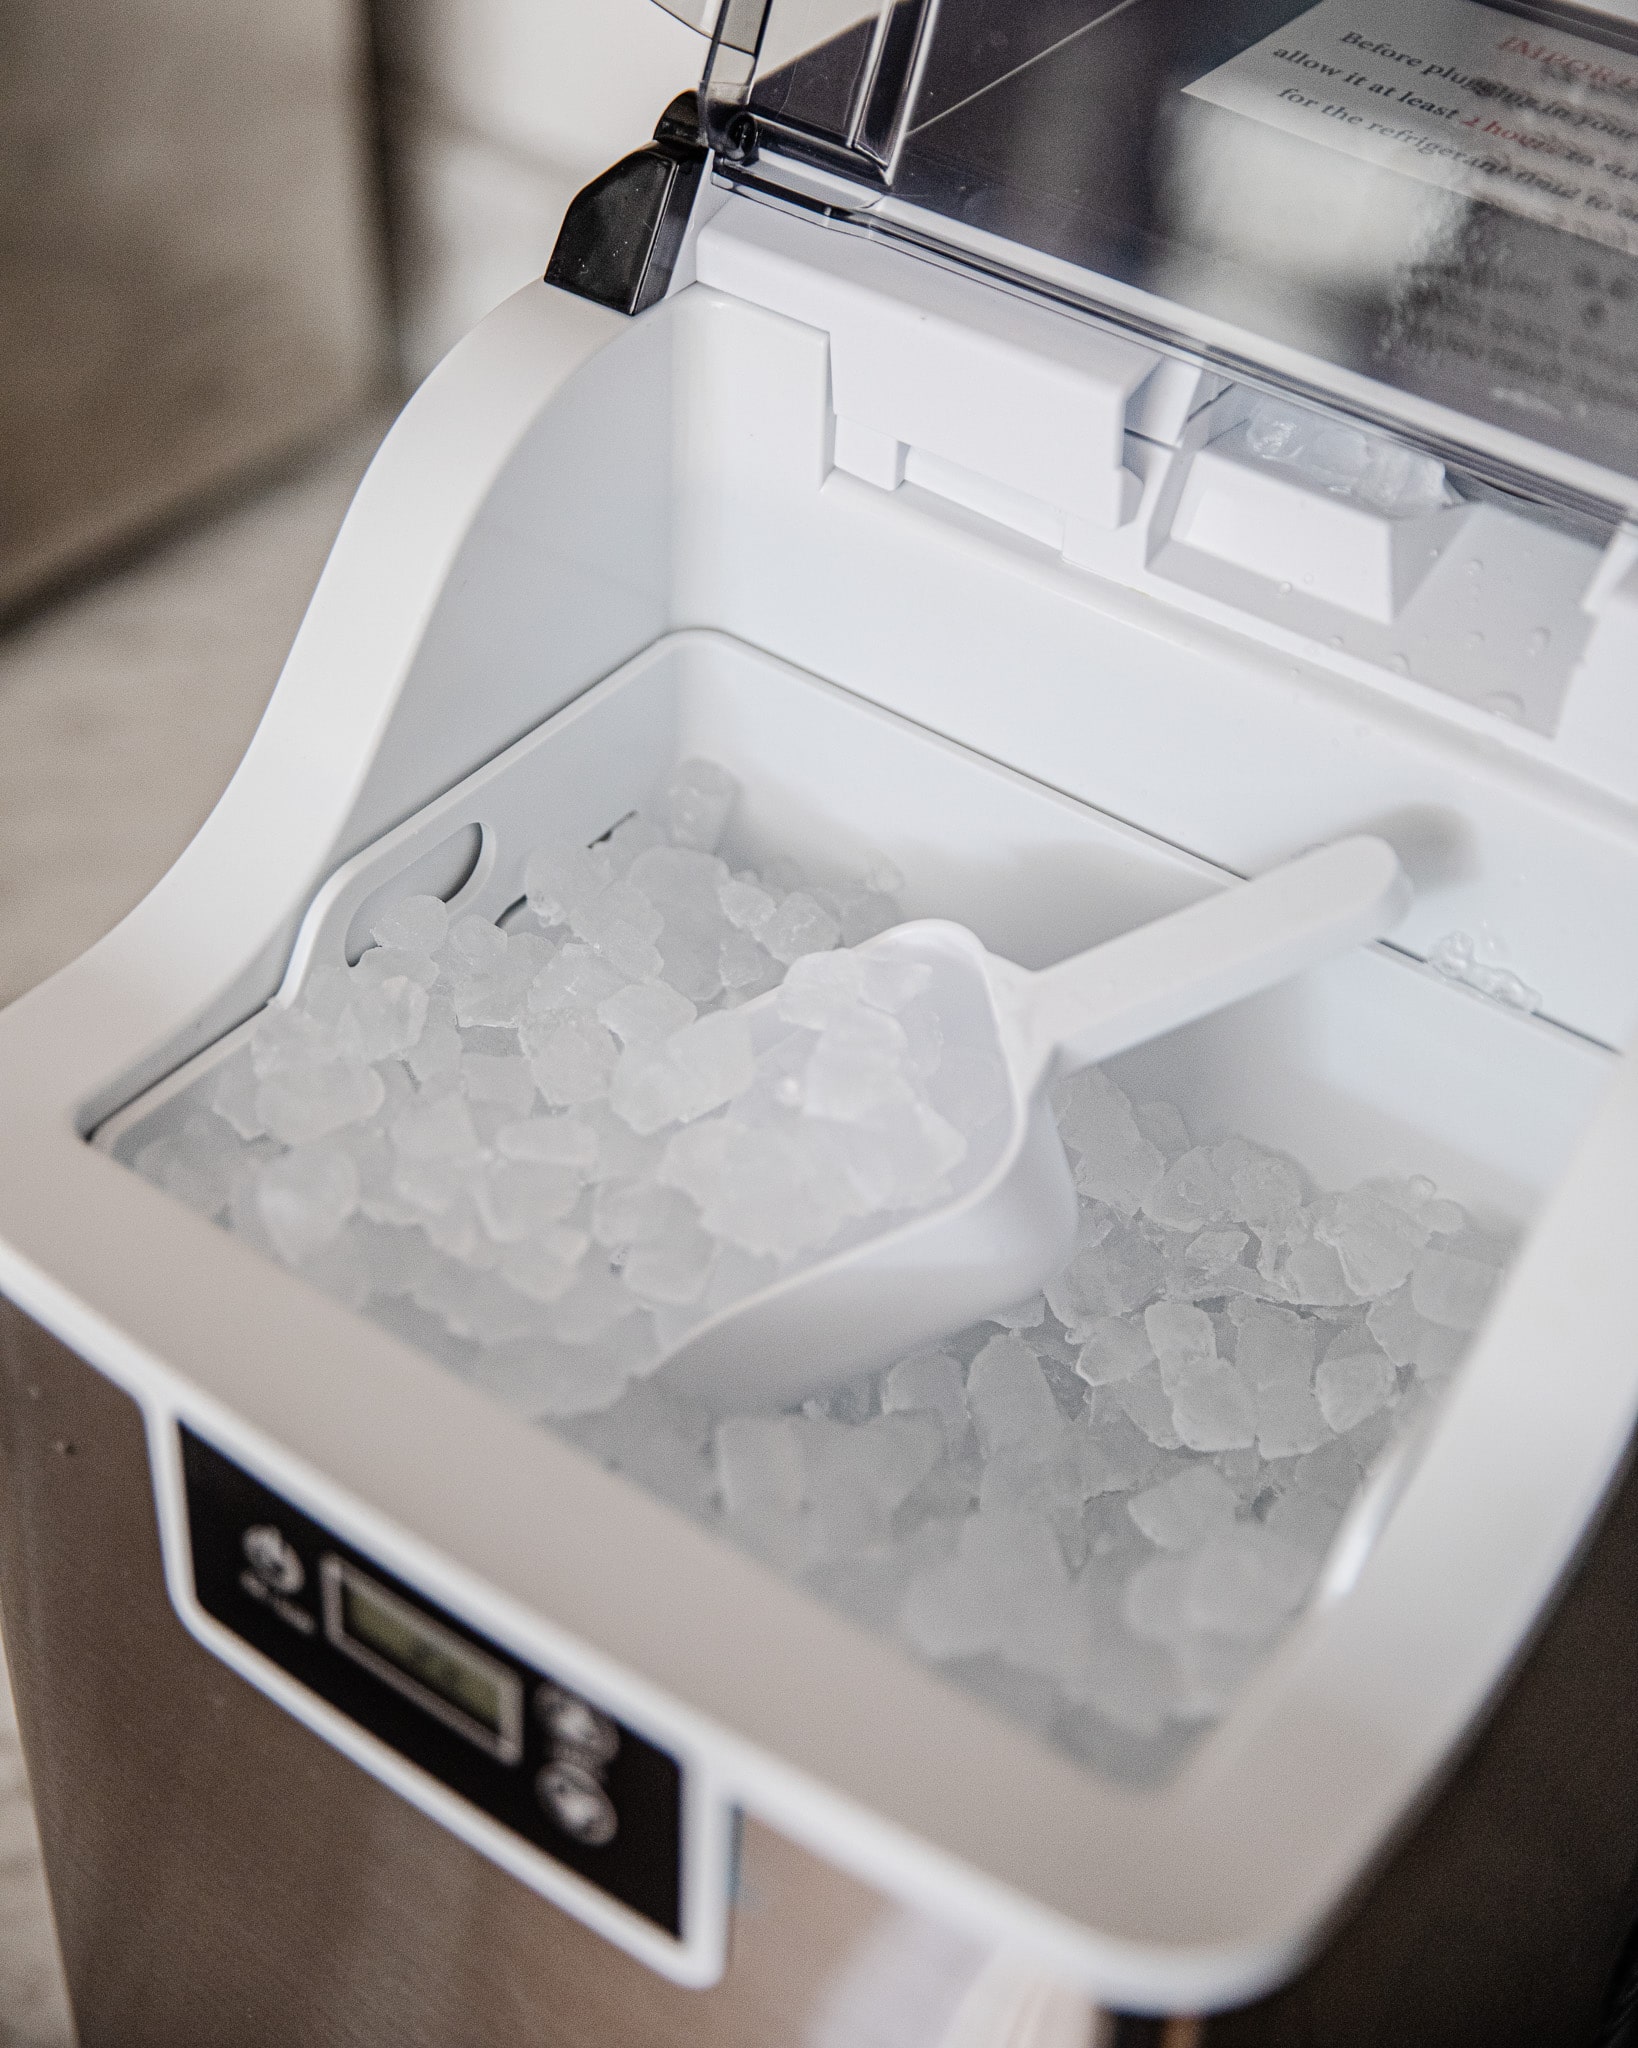 Kndko Countertop Nugget Ice Makers